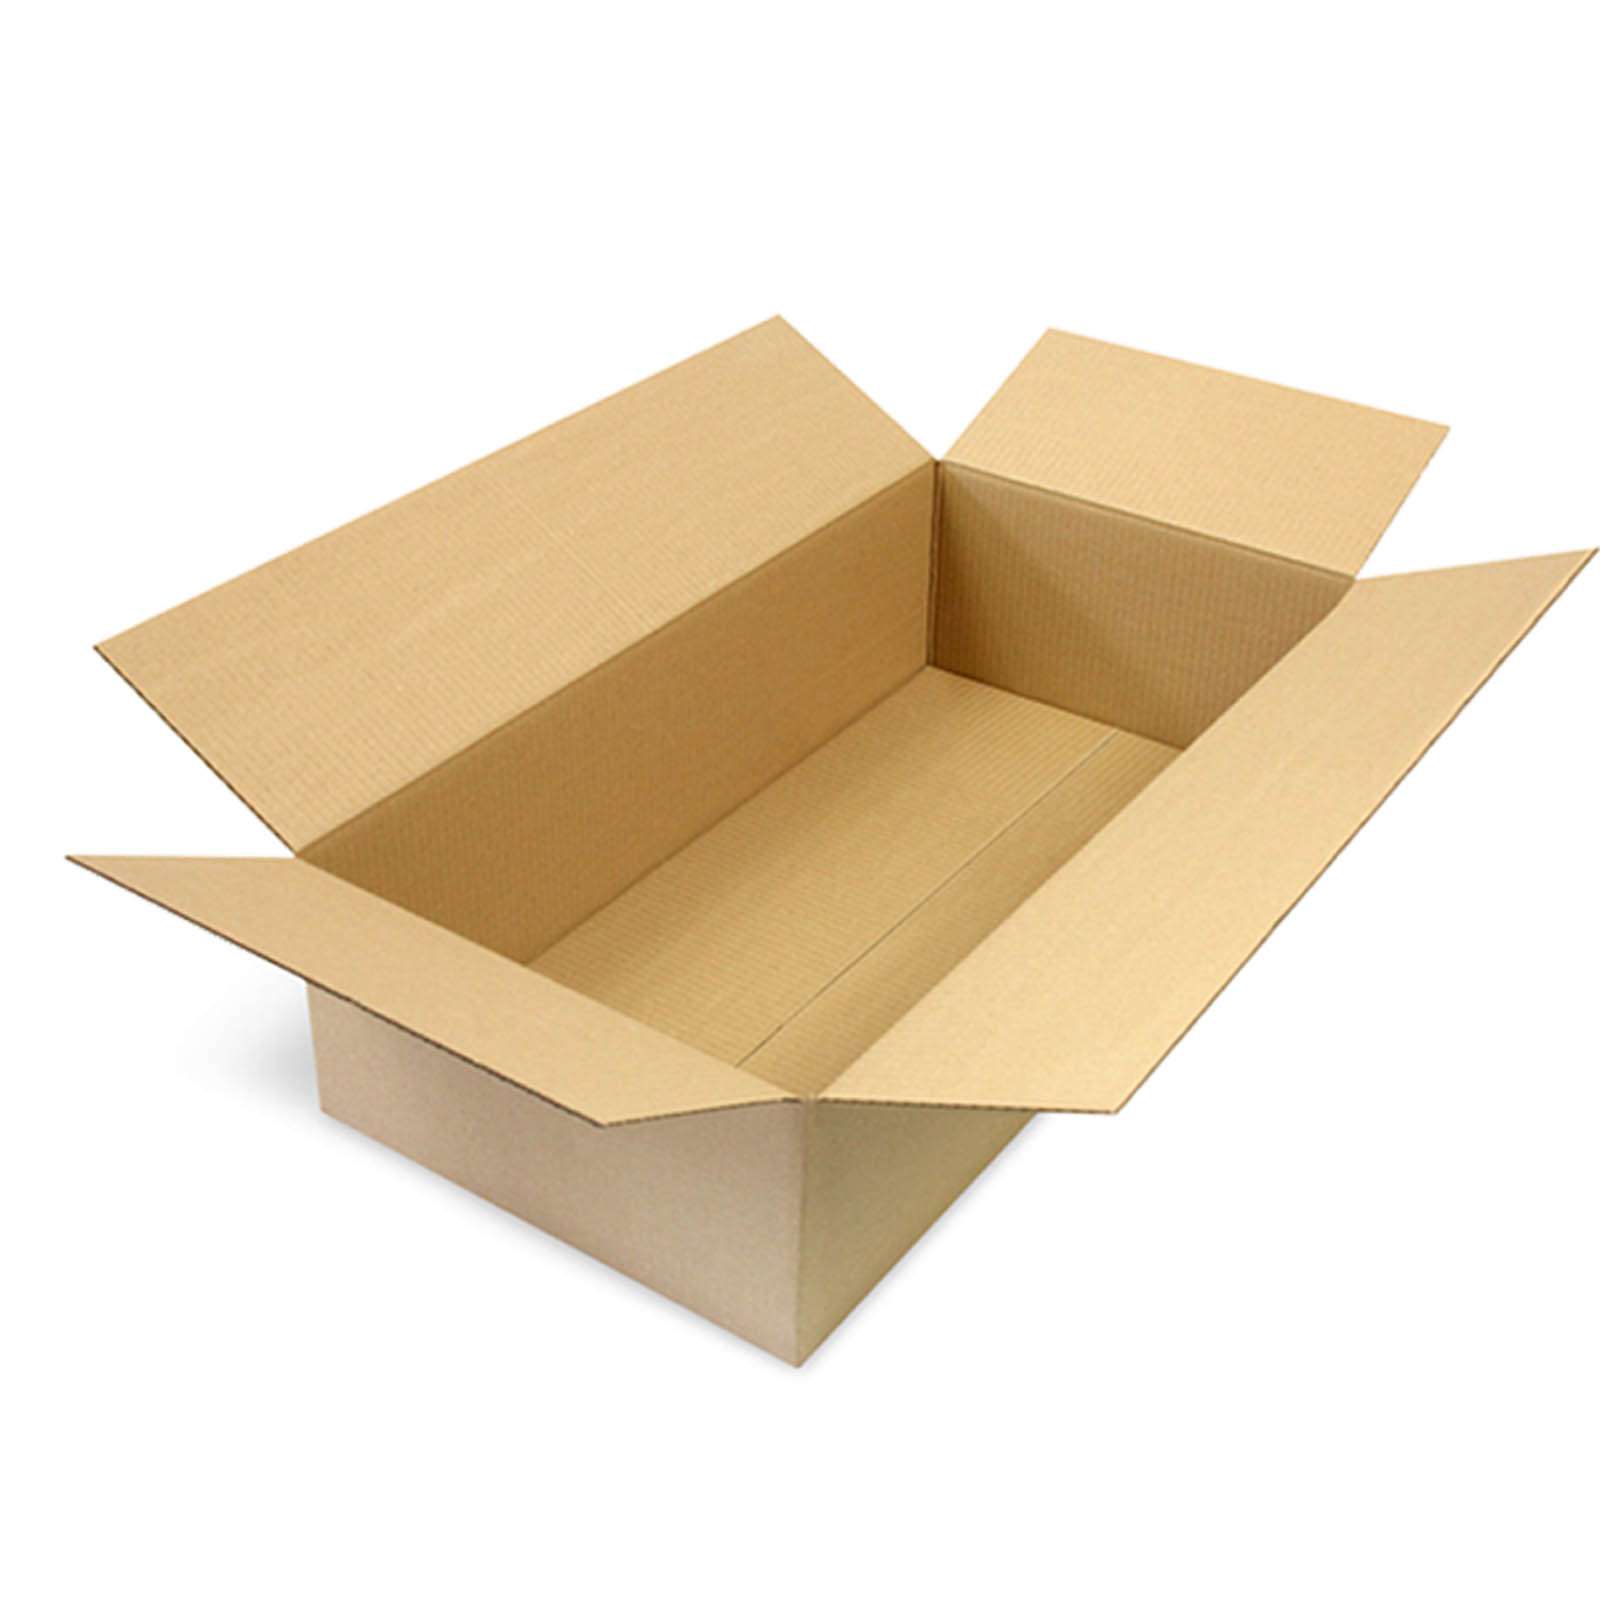 Cardboard box 600x300x150 mm - with digital print 2-sided (neighbouring sides)